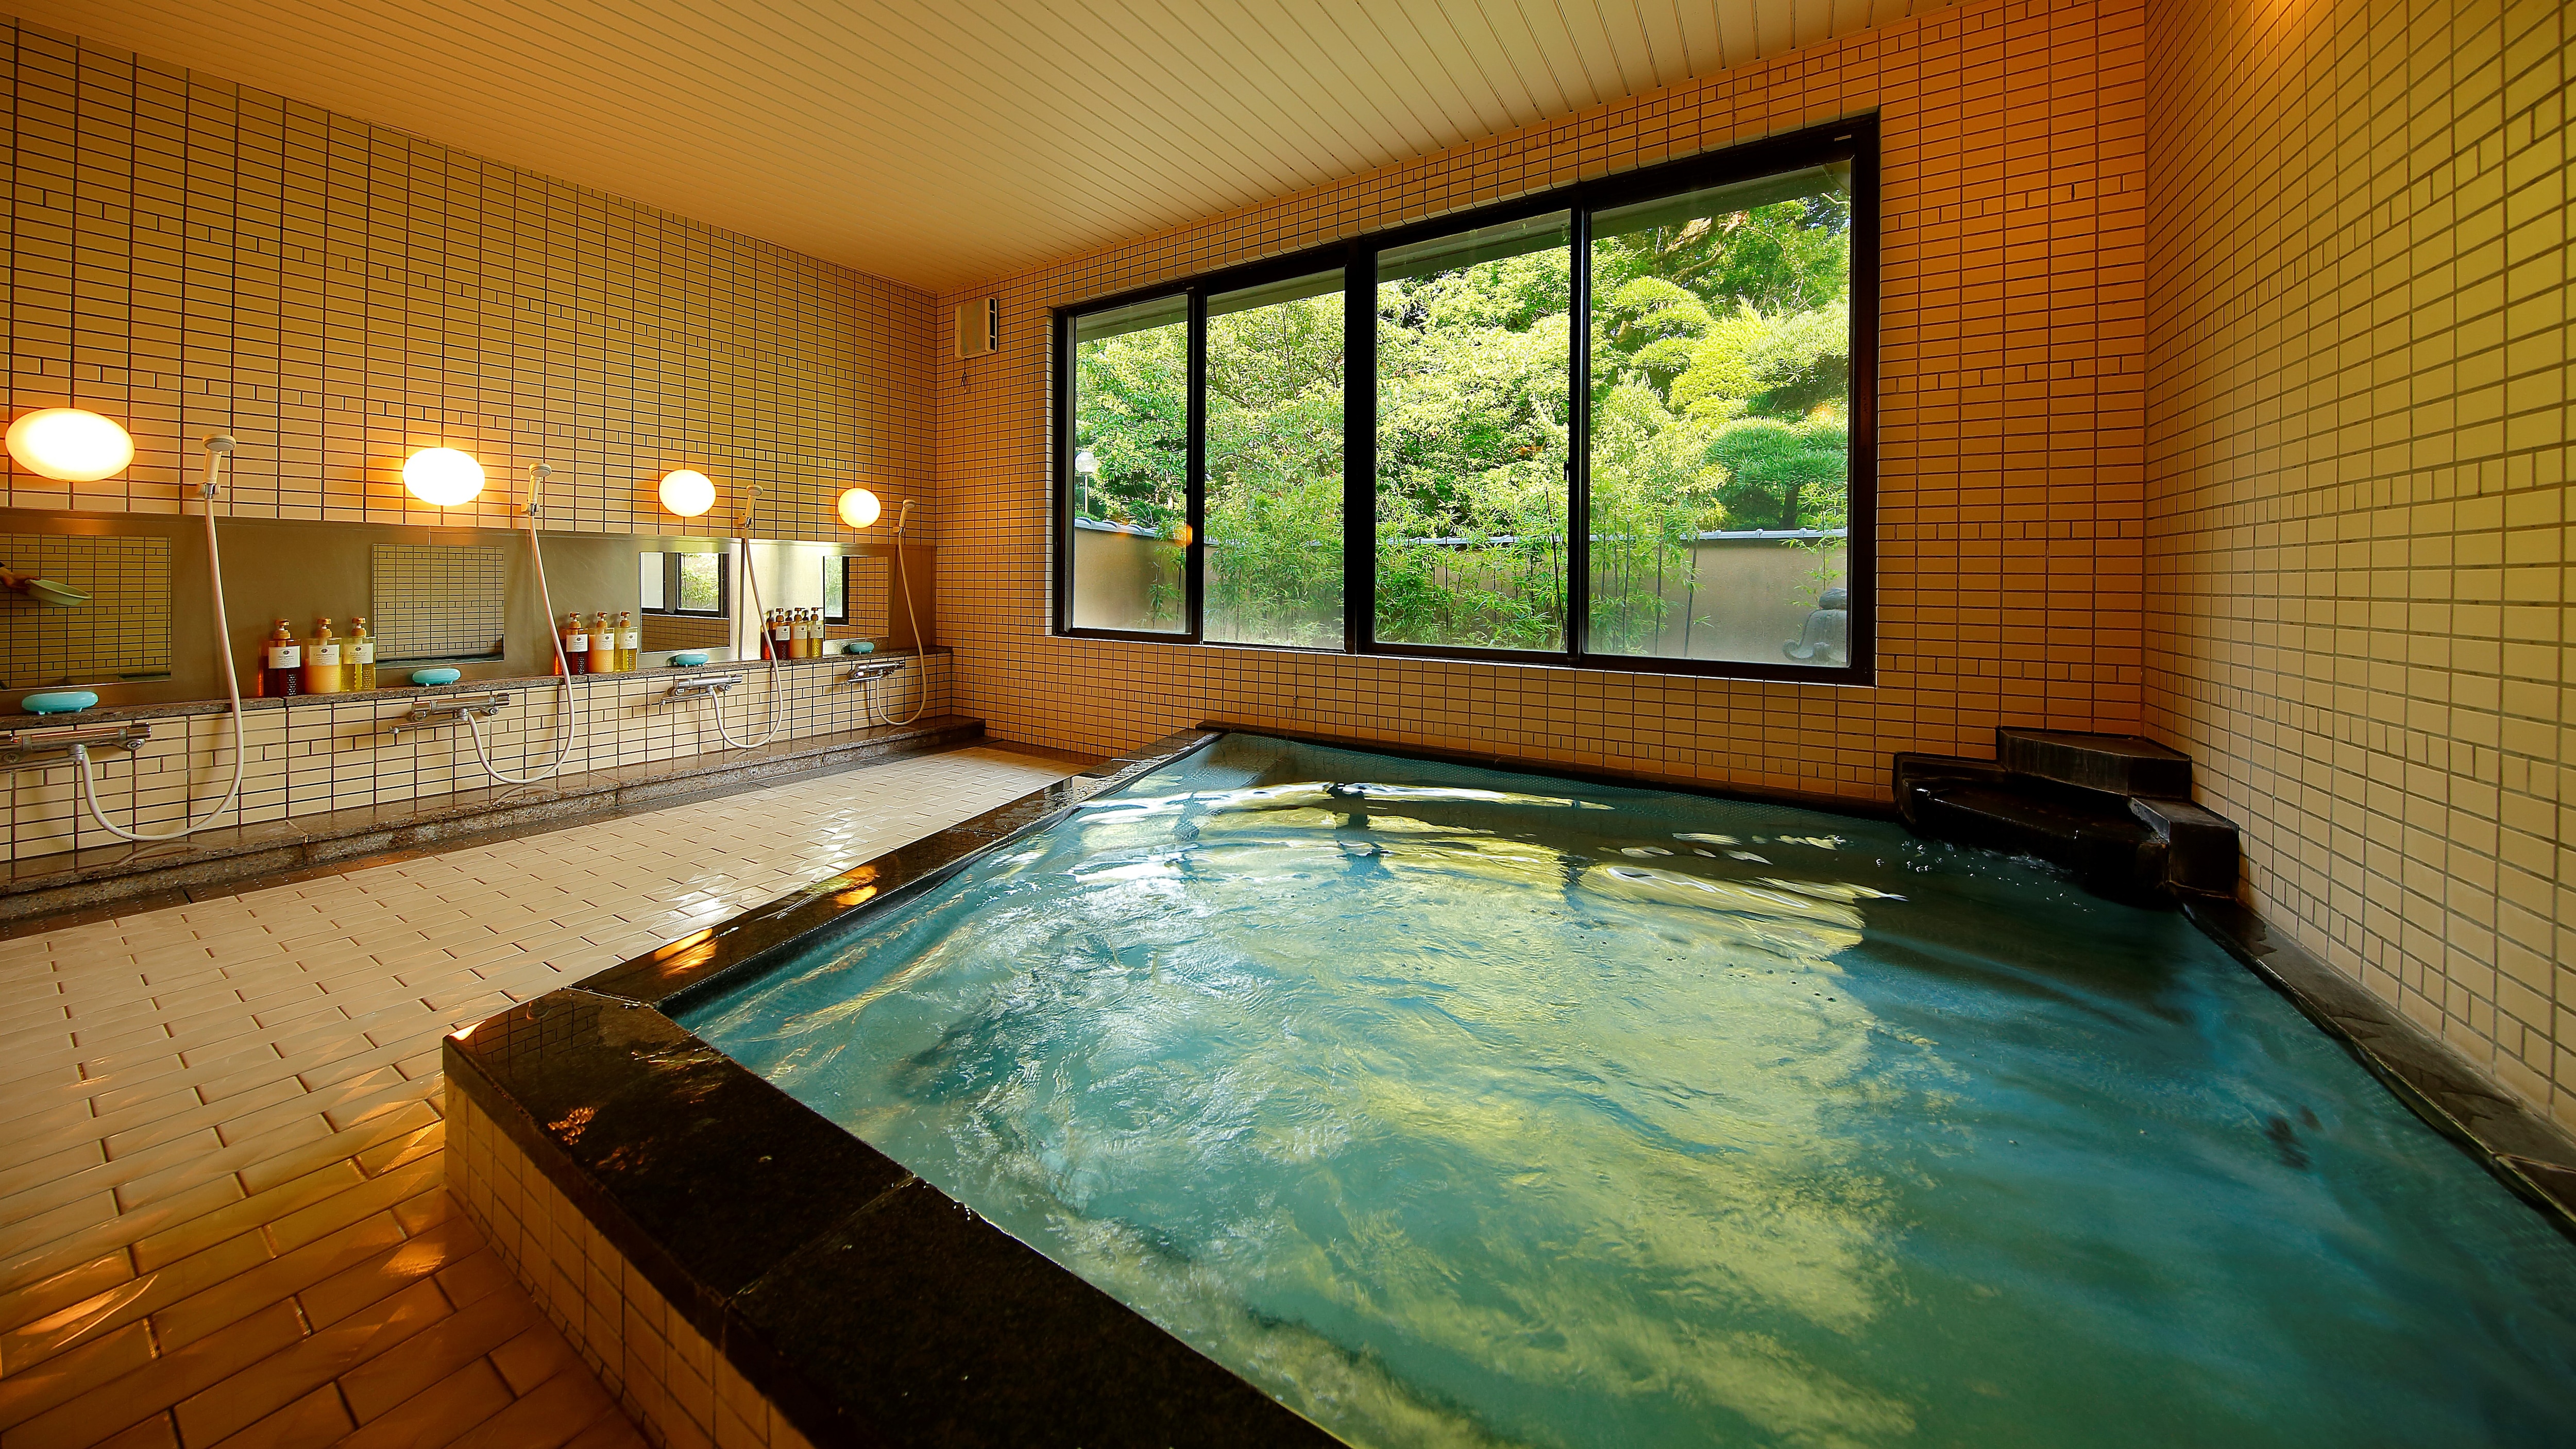 Large communal bath [male] Capacity 8 people Not a hot spring